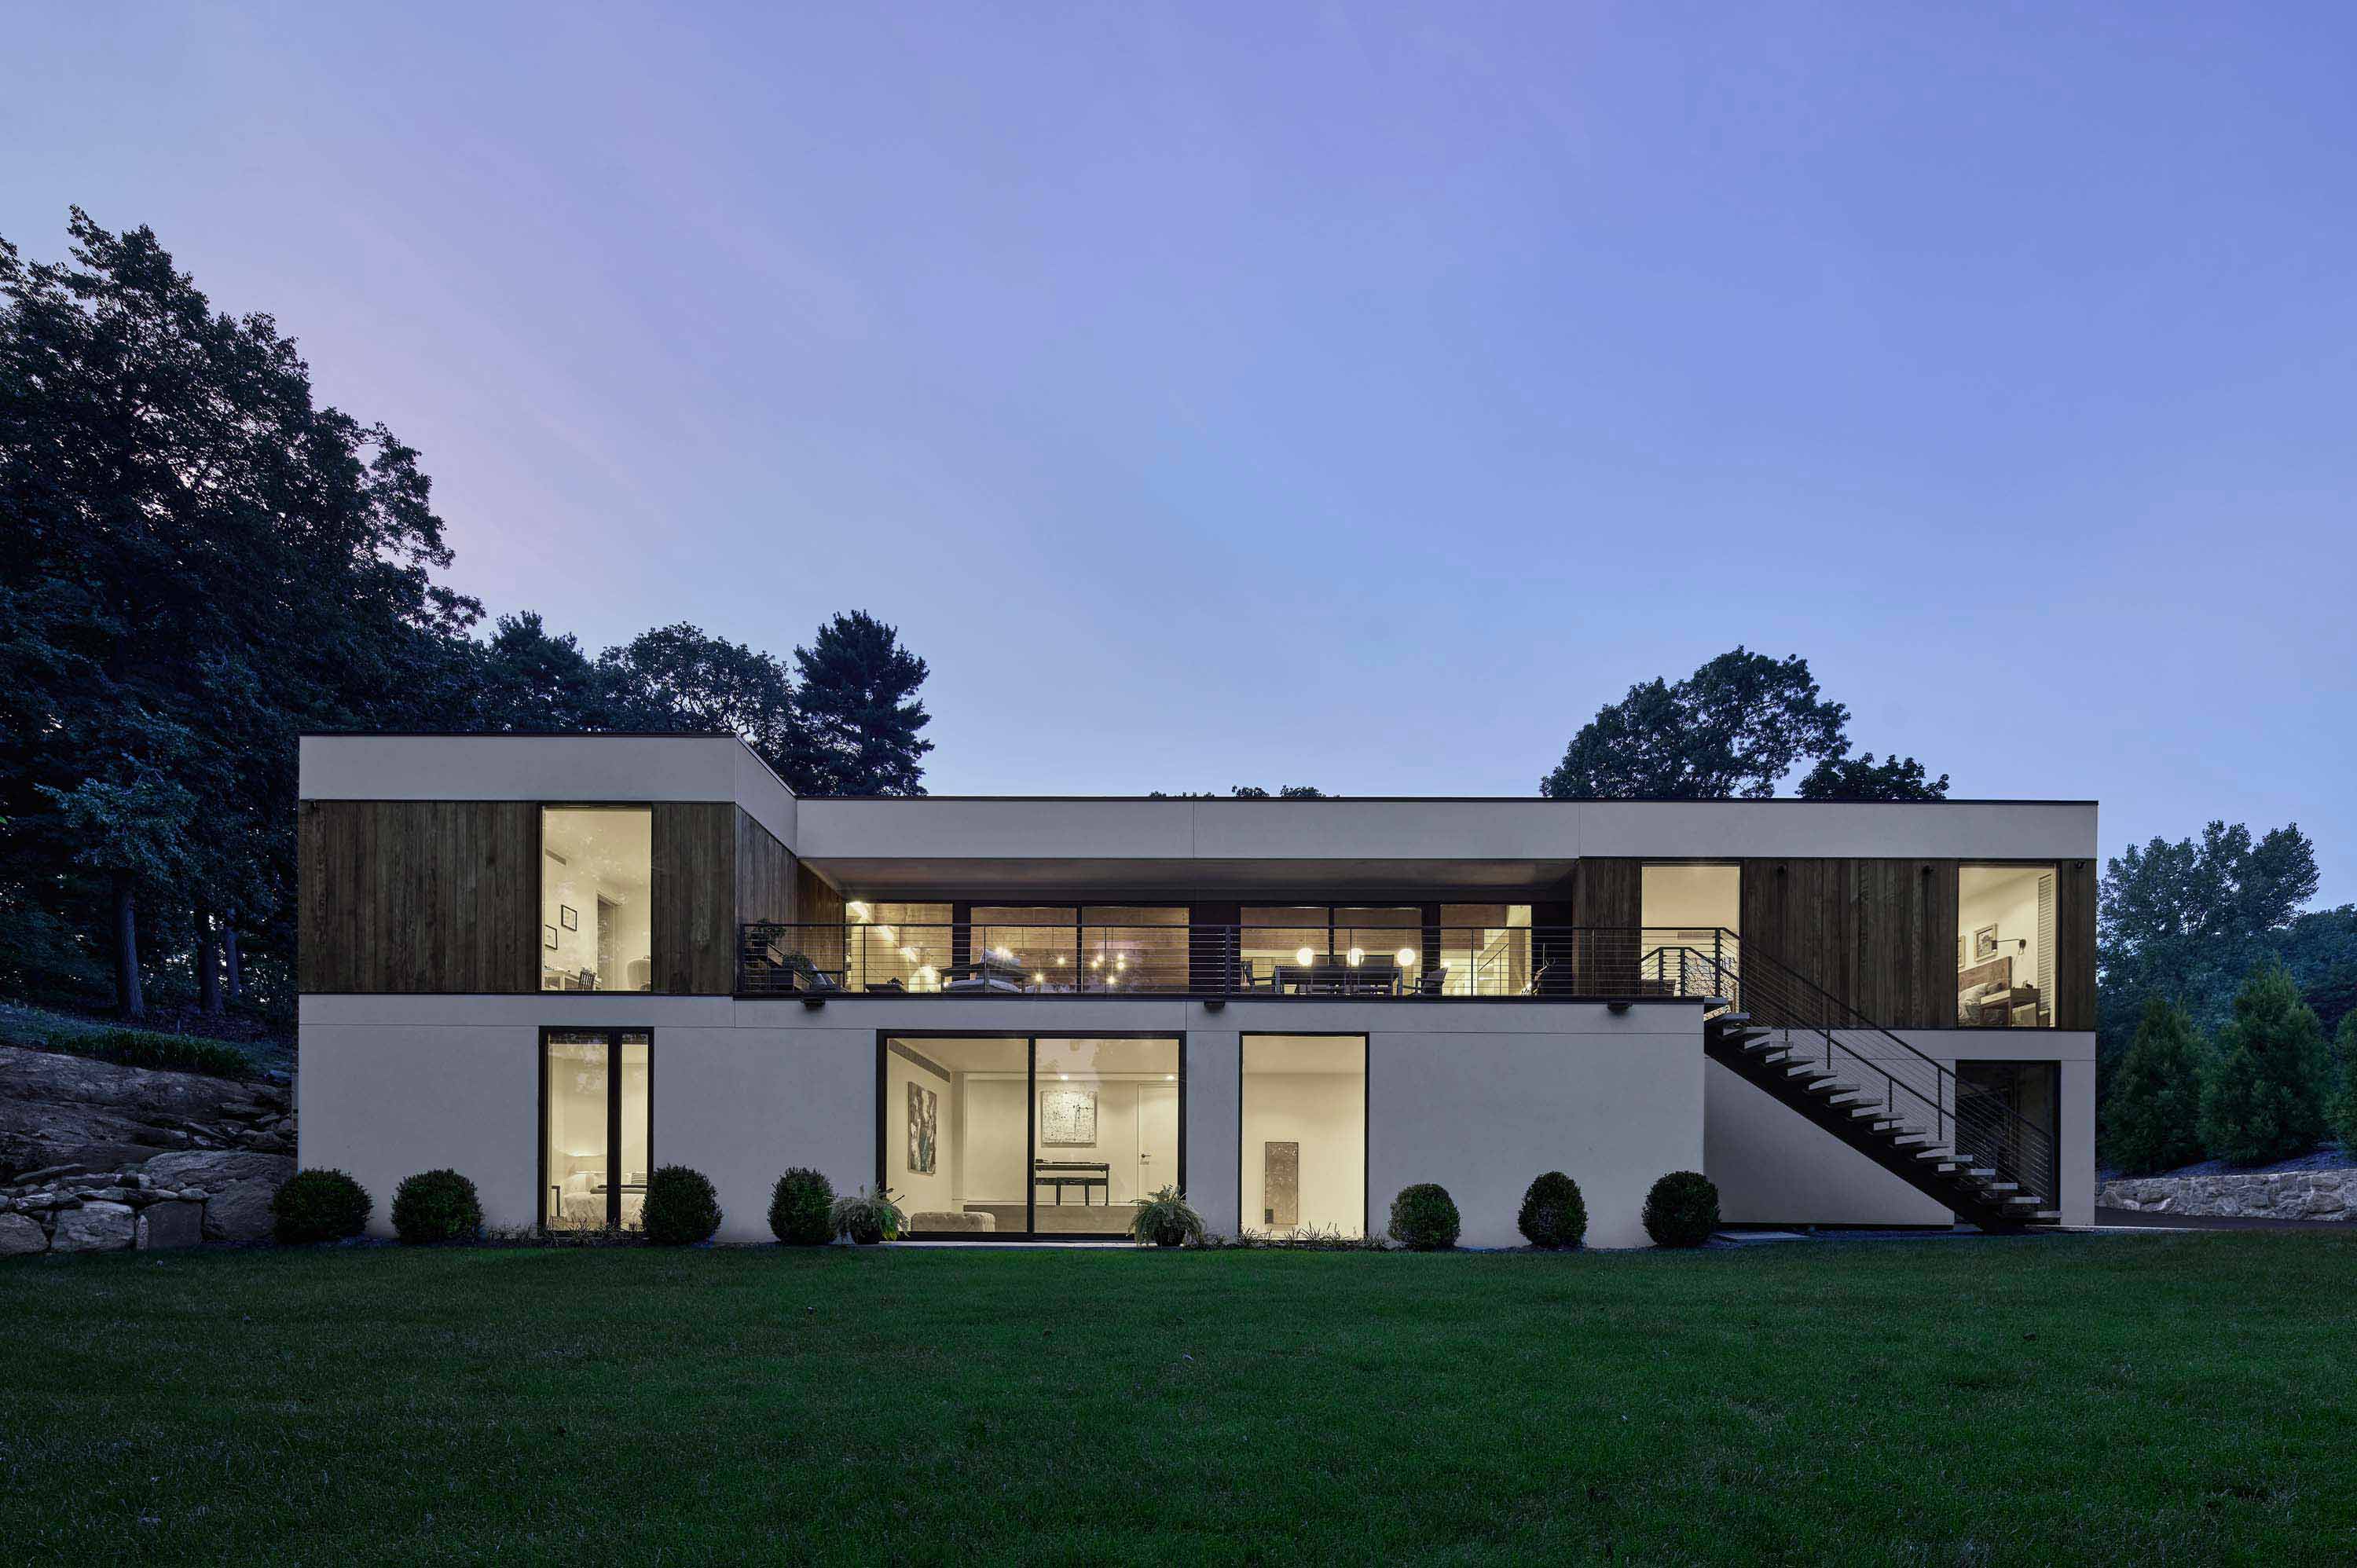 Exterior shot at dusk of Pelham Manor by Specht Novak Architects, showcasing the warmth of the indoors. Shot by Dror Baldinger.